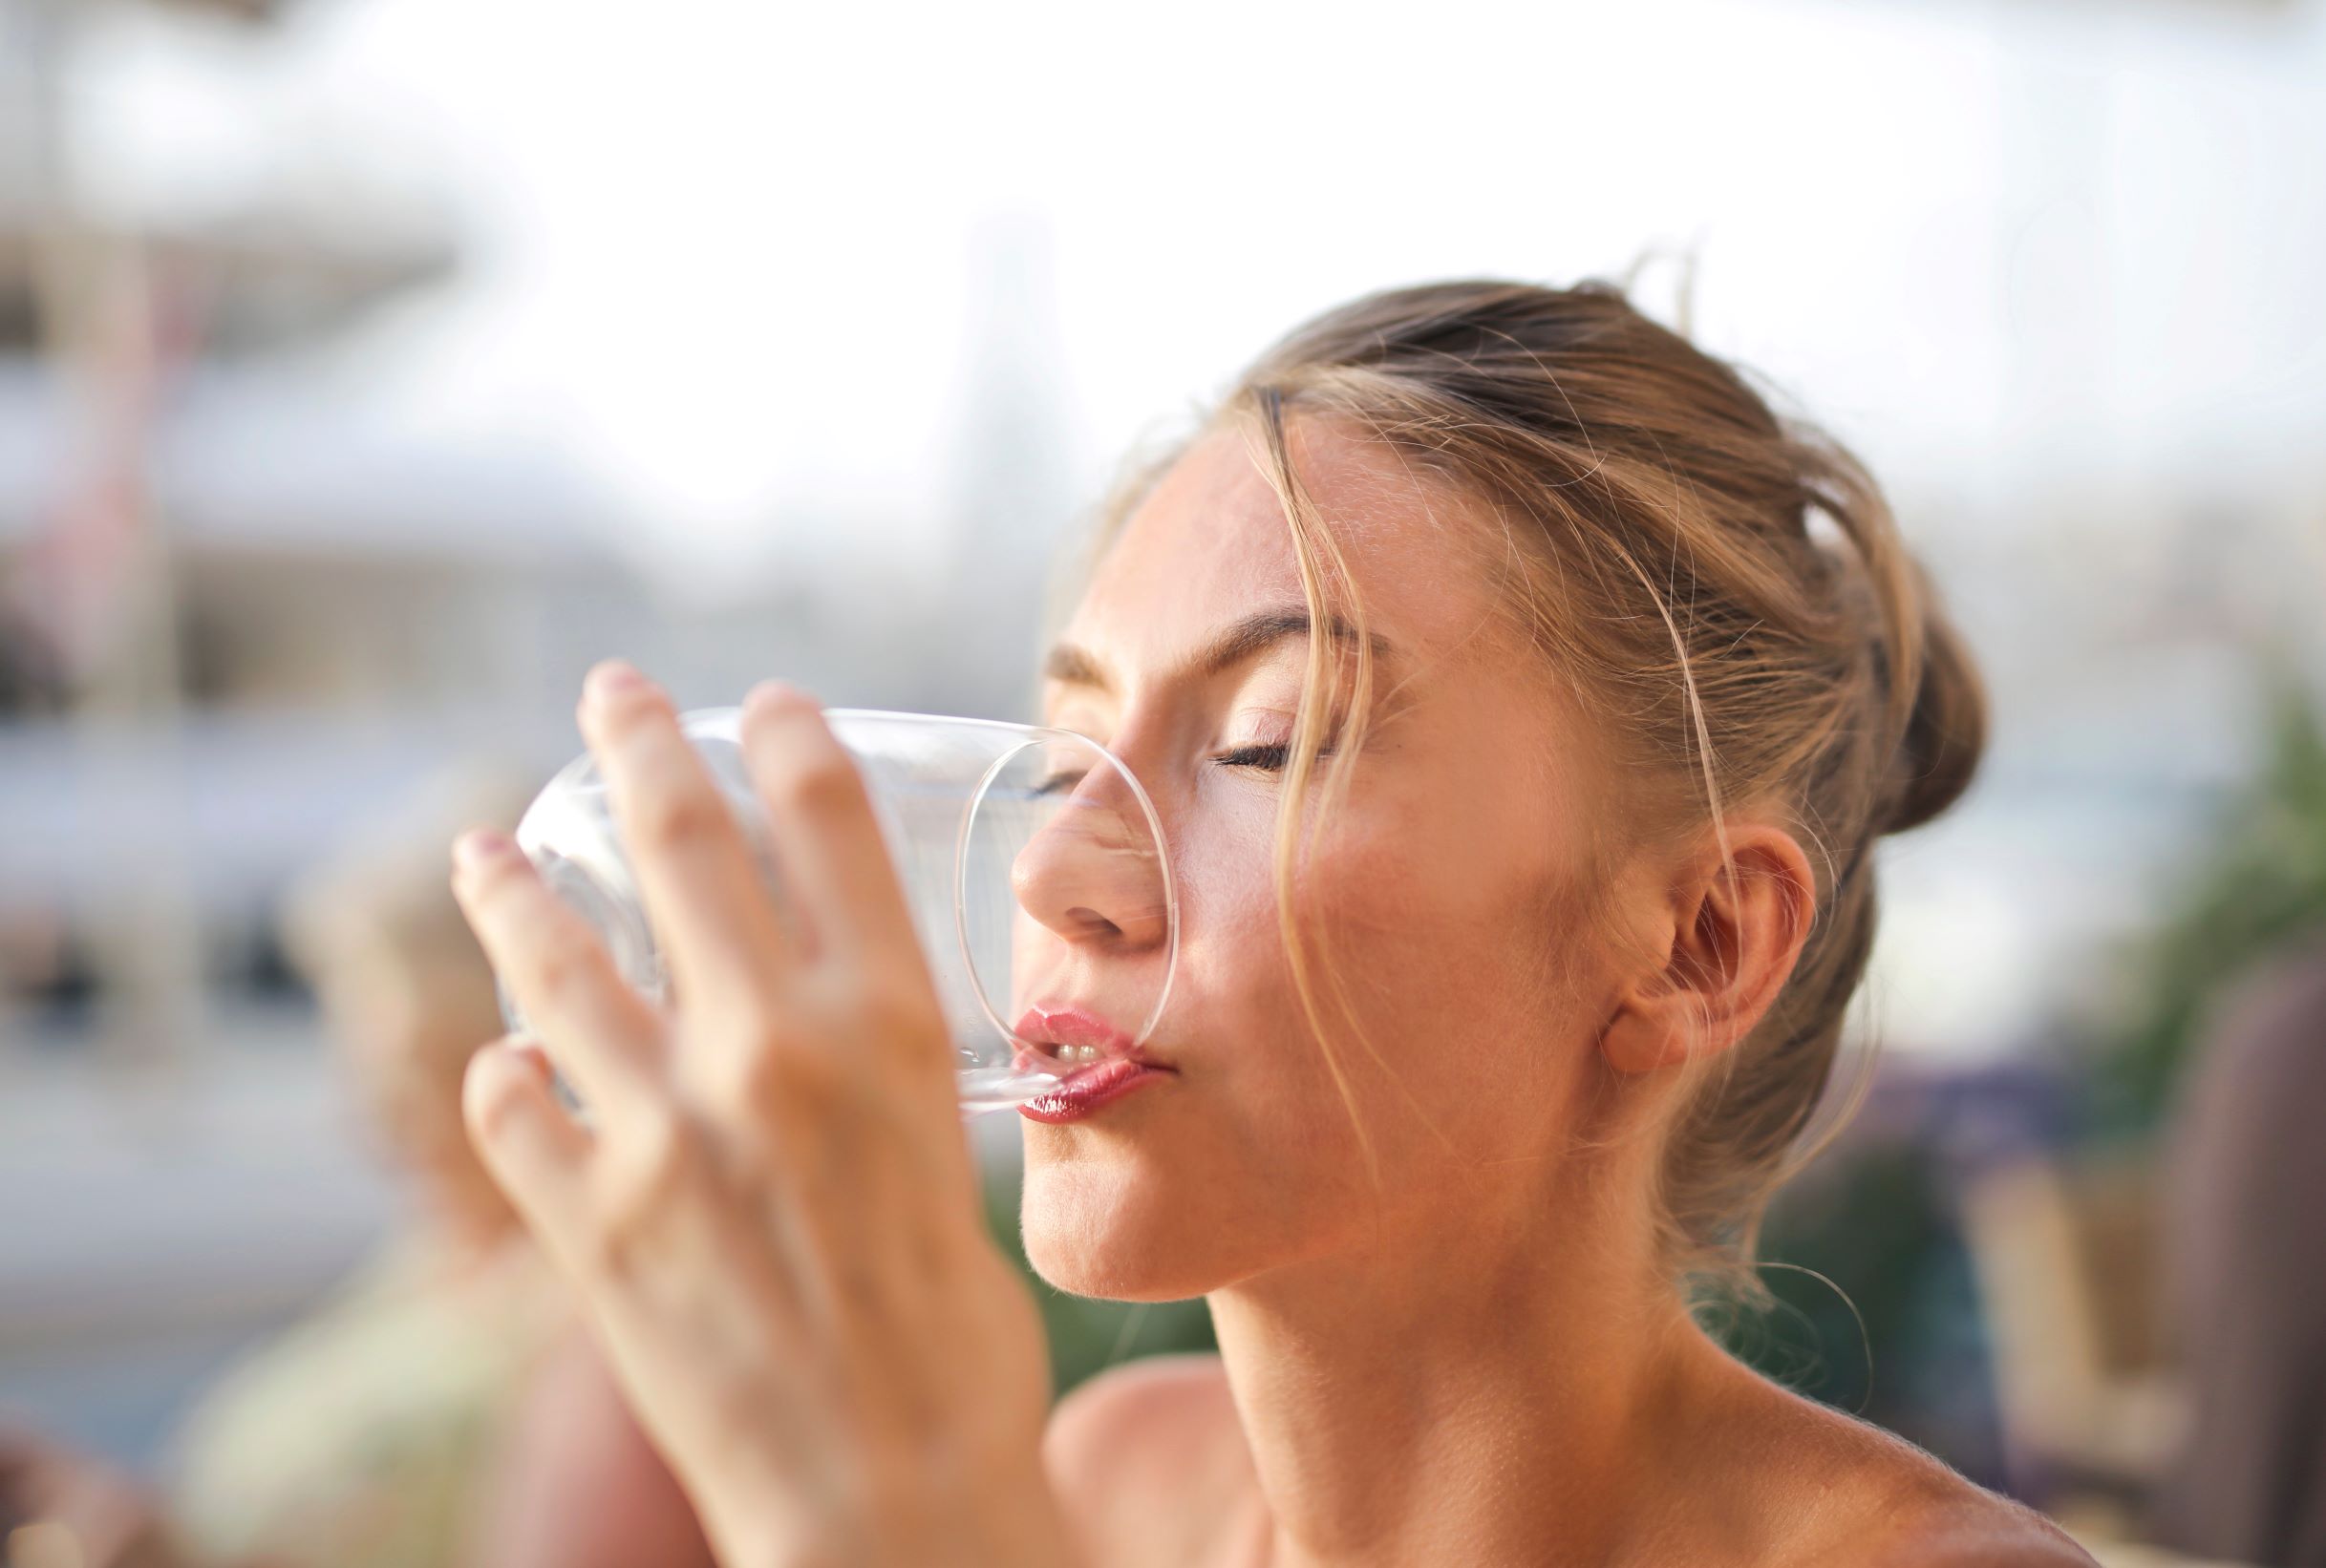 Drinking water is good for your mouth in numerous ways, including cleaning your mouth to prevent tooth decay.